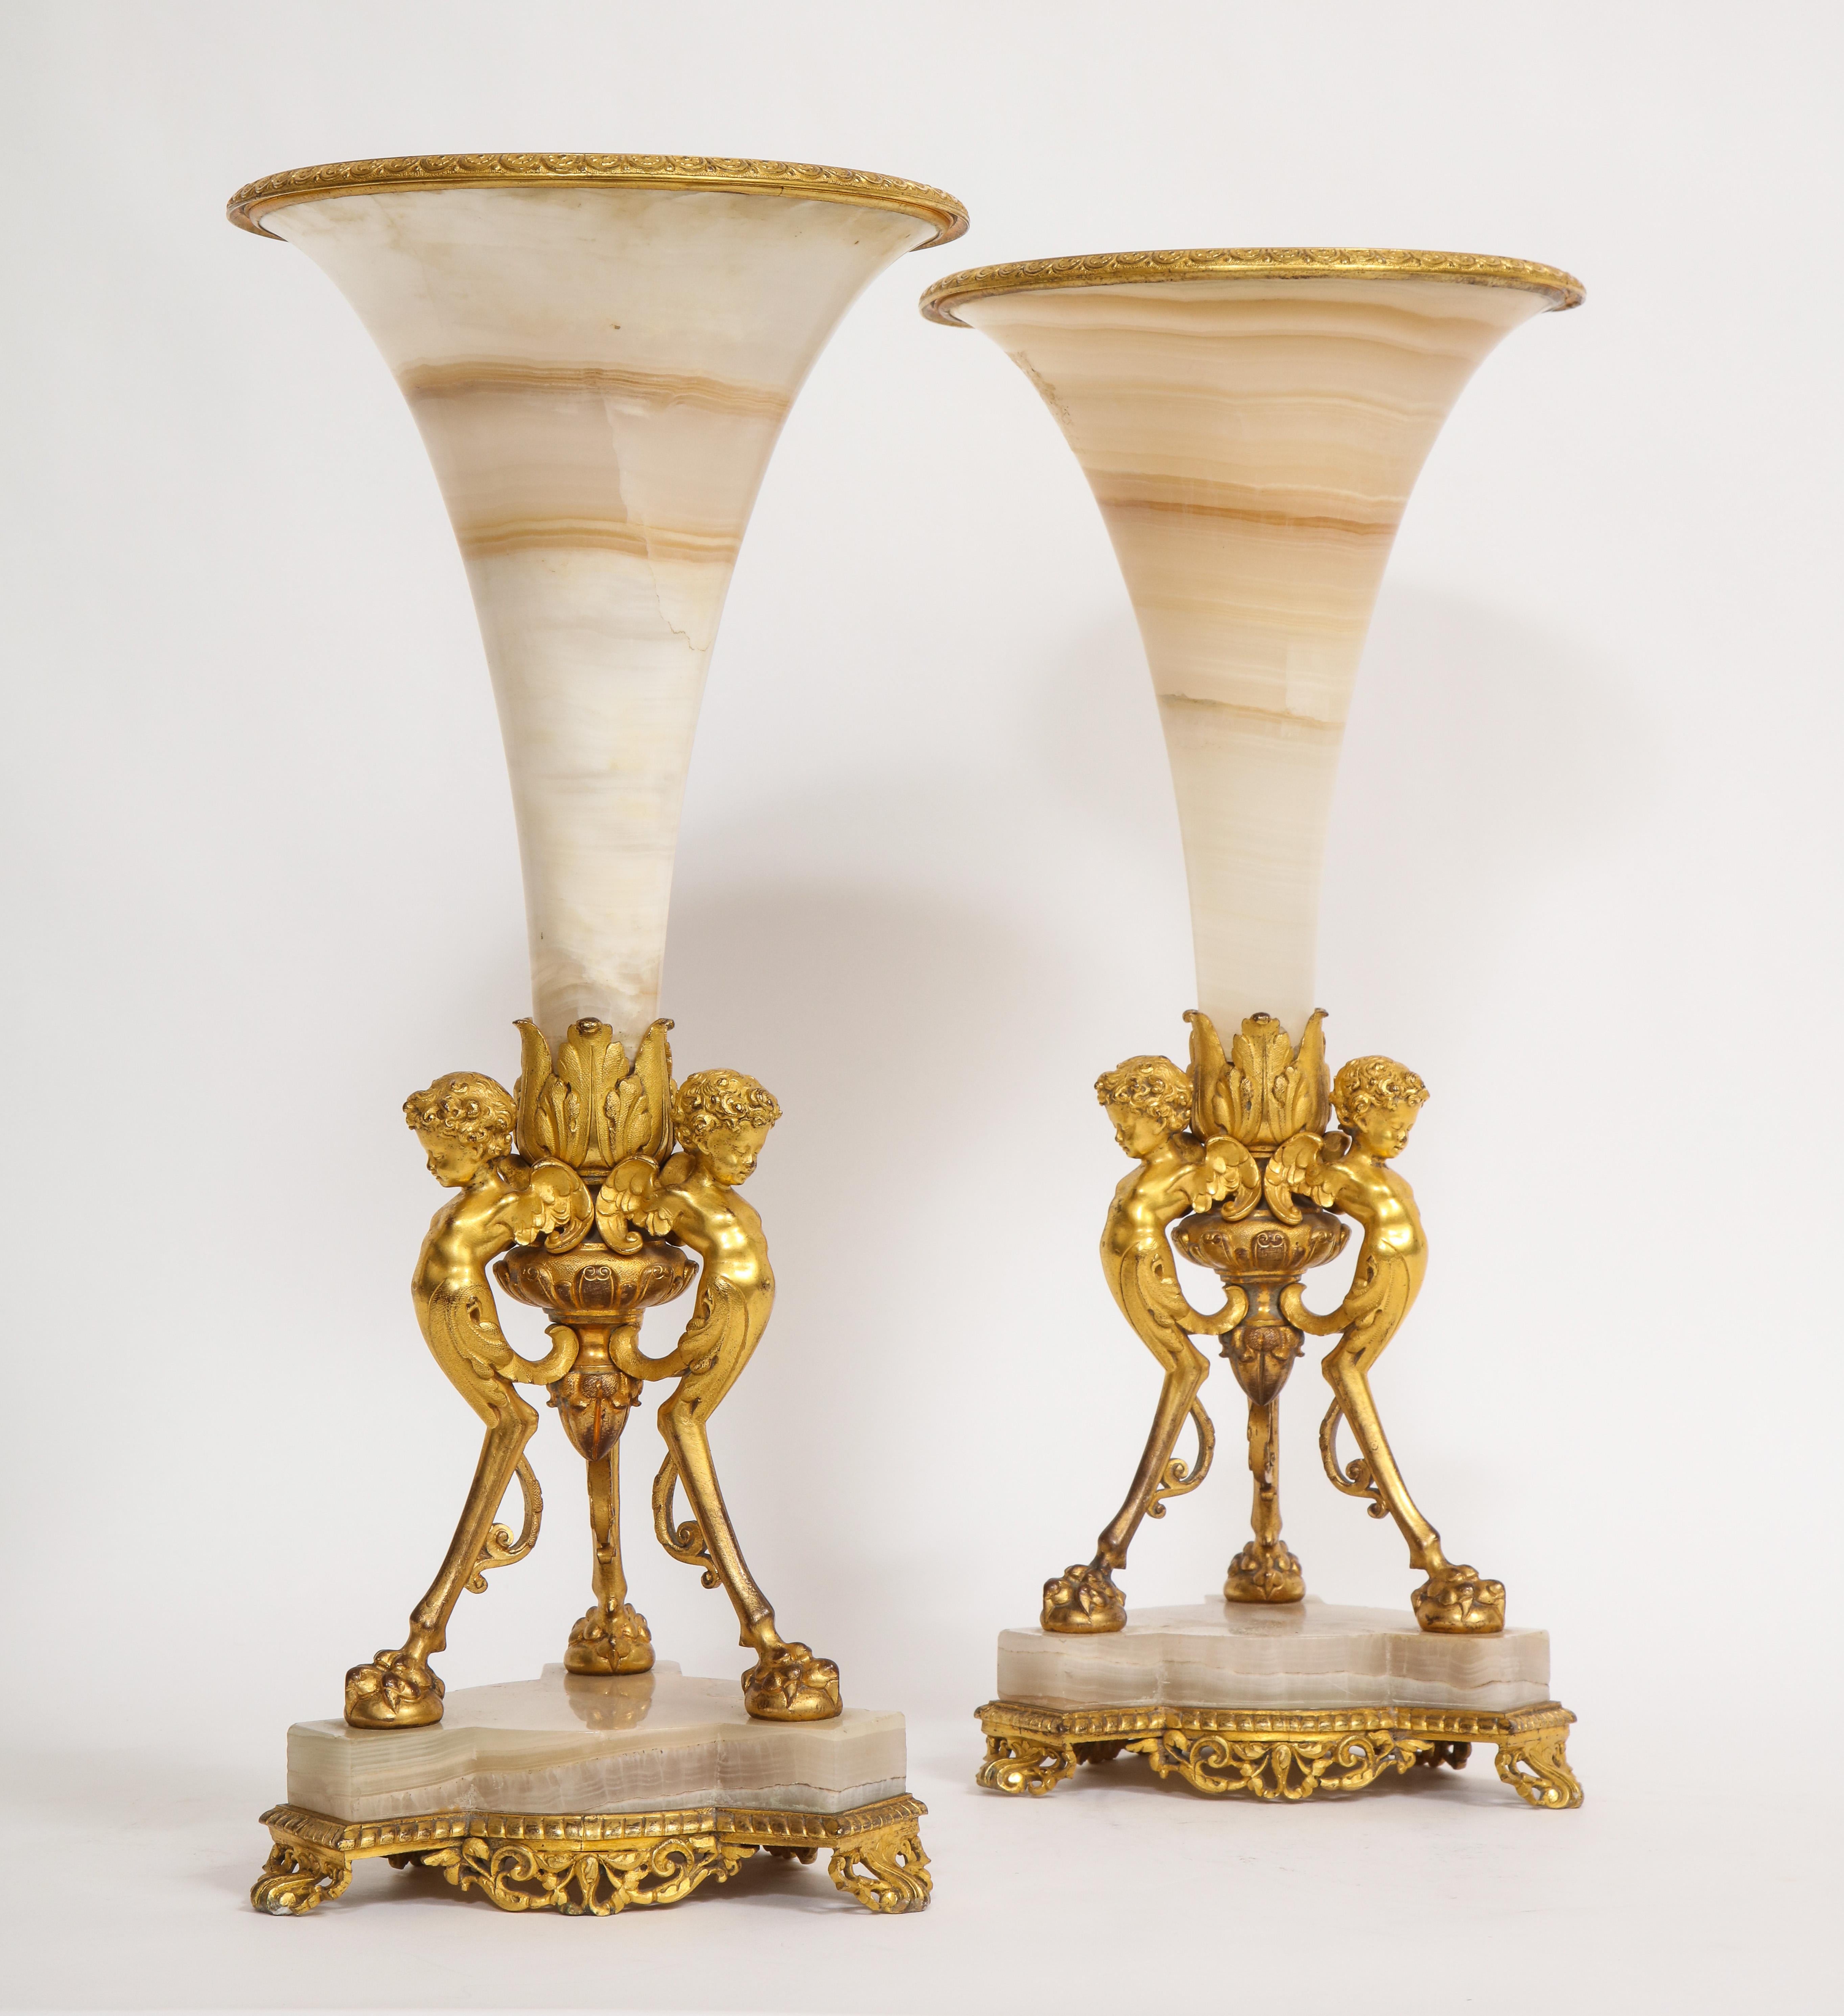 Pair of French 19th Century Figural Dore Bronze Mntd. Alabaster Trumpet Vases In Good Condition For Sale In New York, NY